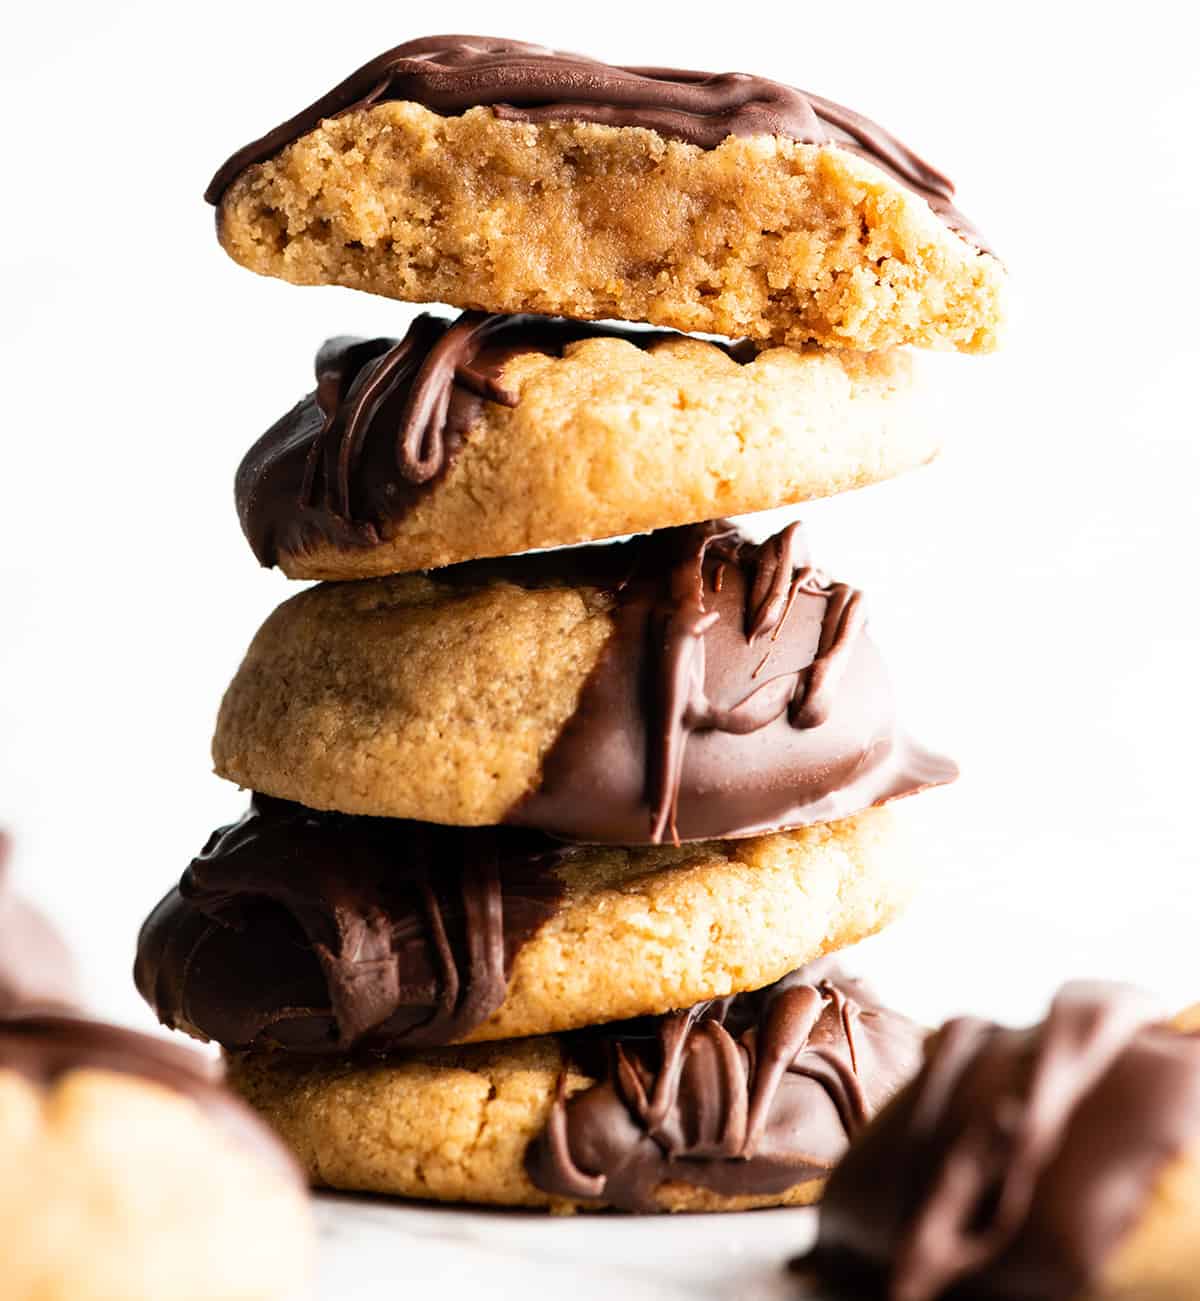 front view of a stack of 5 gluten-free peanut butter cookies dipped in chocolate